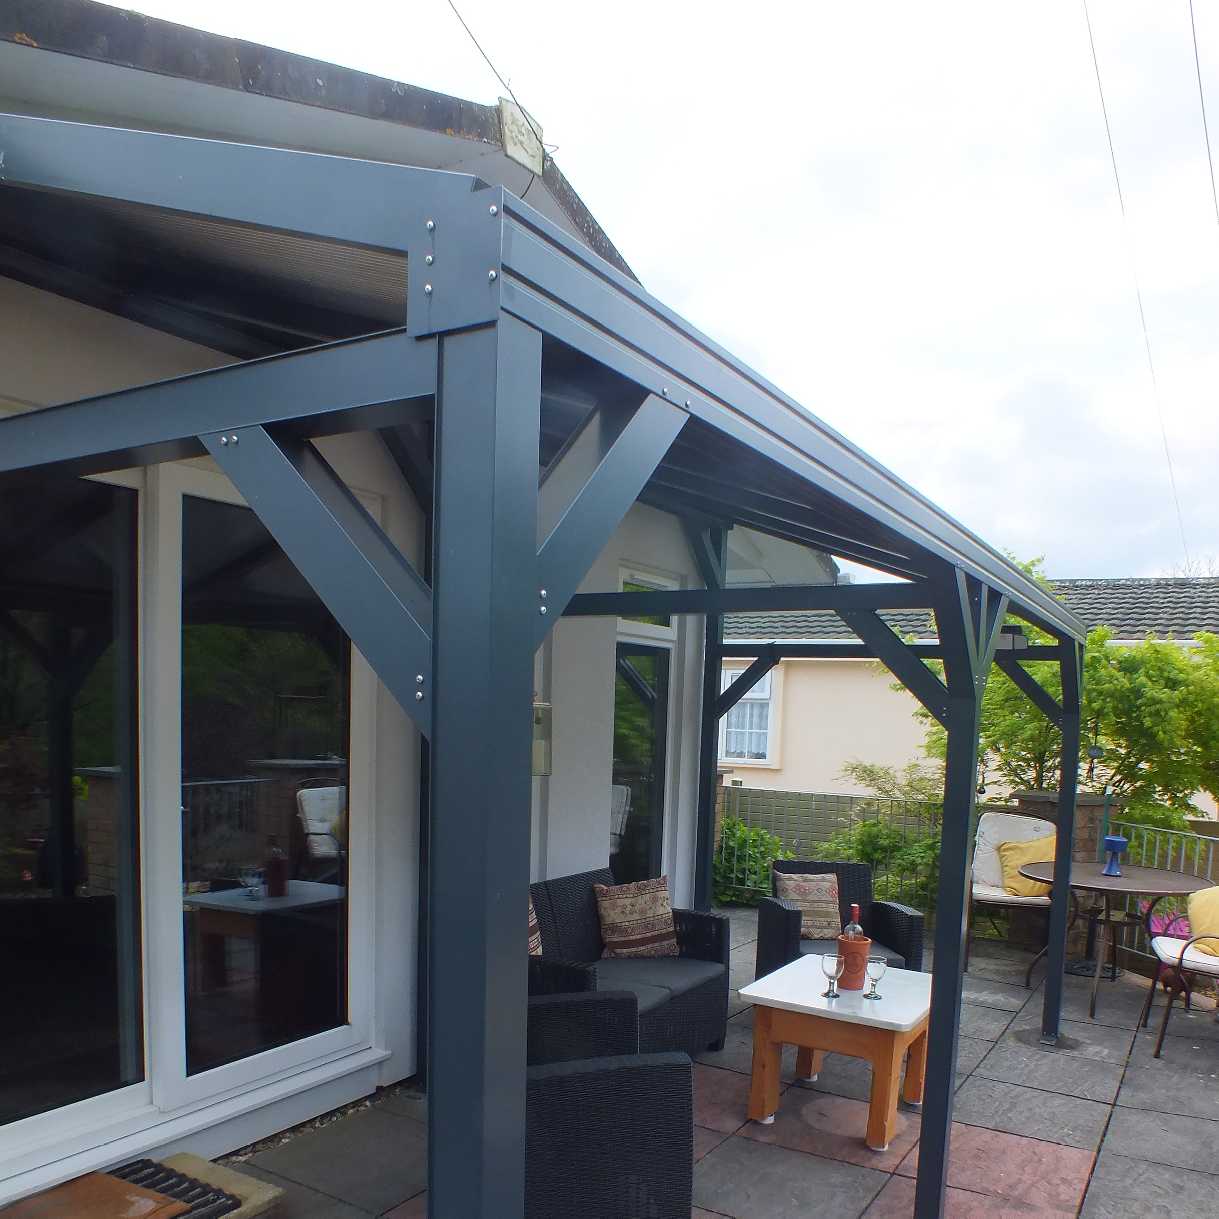 Affordable Omega Smart Free-Standing, Anthracite Grey MonoPitch Roof Canopy with 16mm Polycarbonate Glazing - 4.9m (W) x 3.5m (P), (6) Supporting Posts